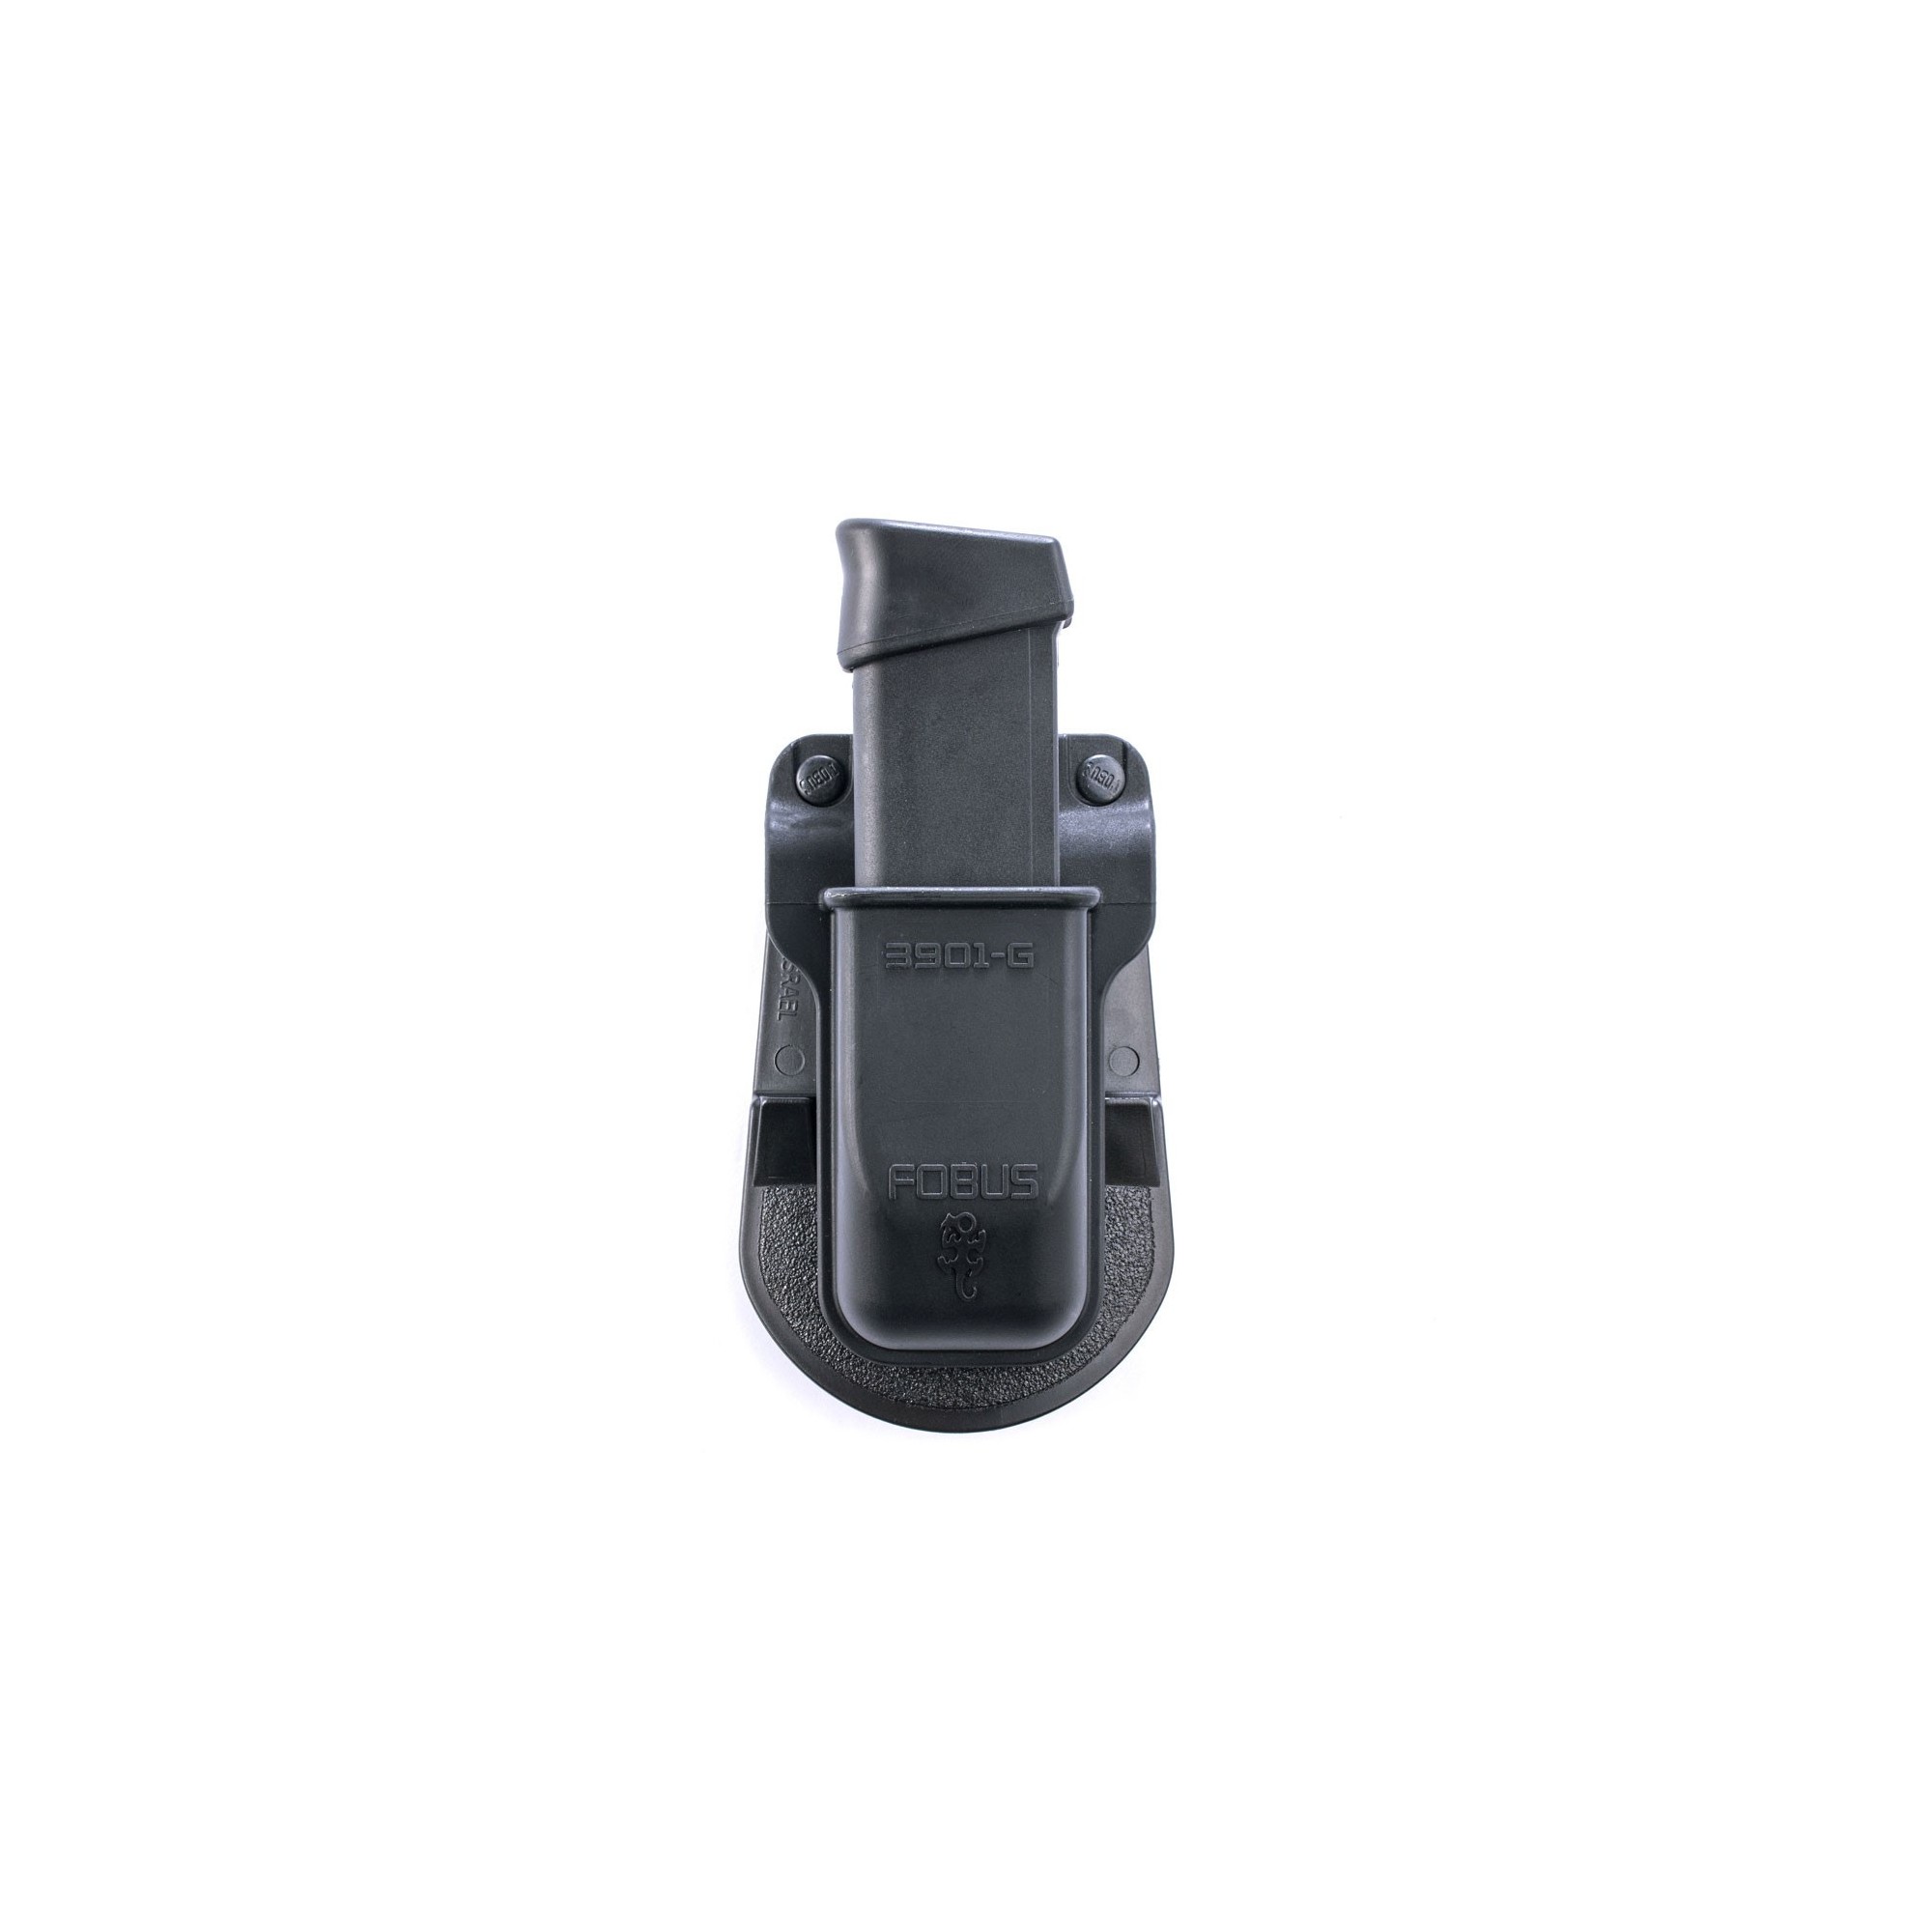 Porte chargeur simple pour Glock double-Stack 9 mm